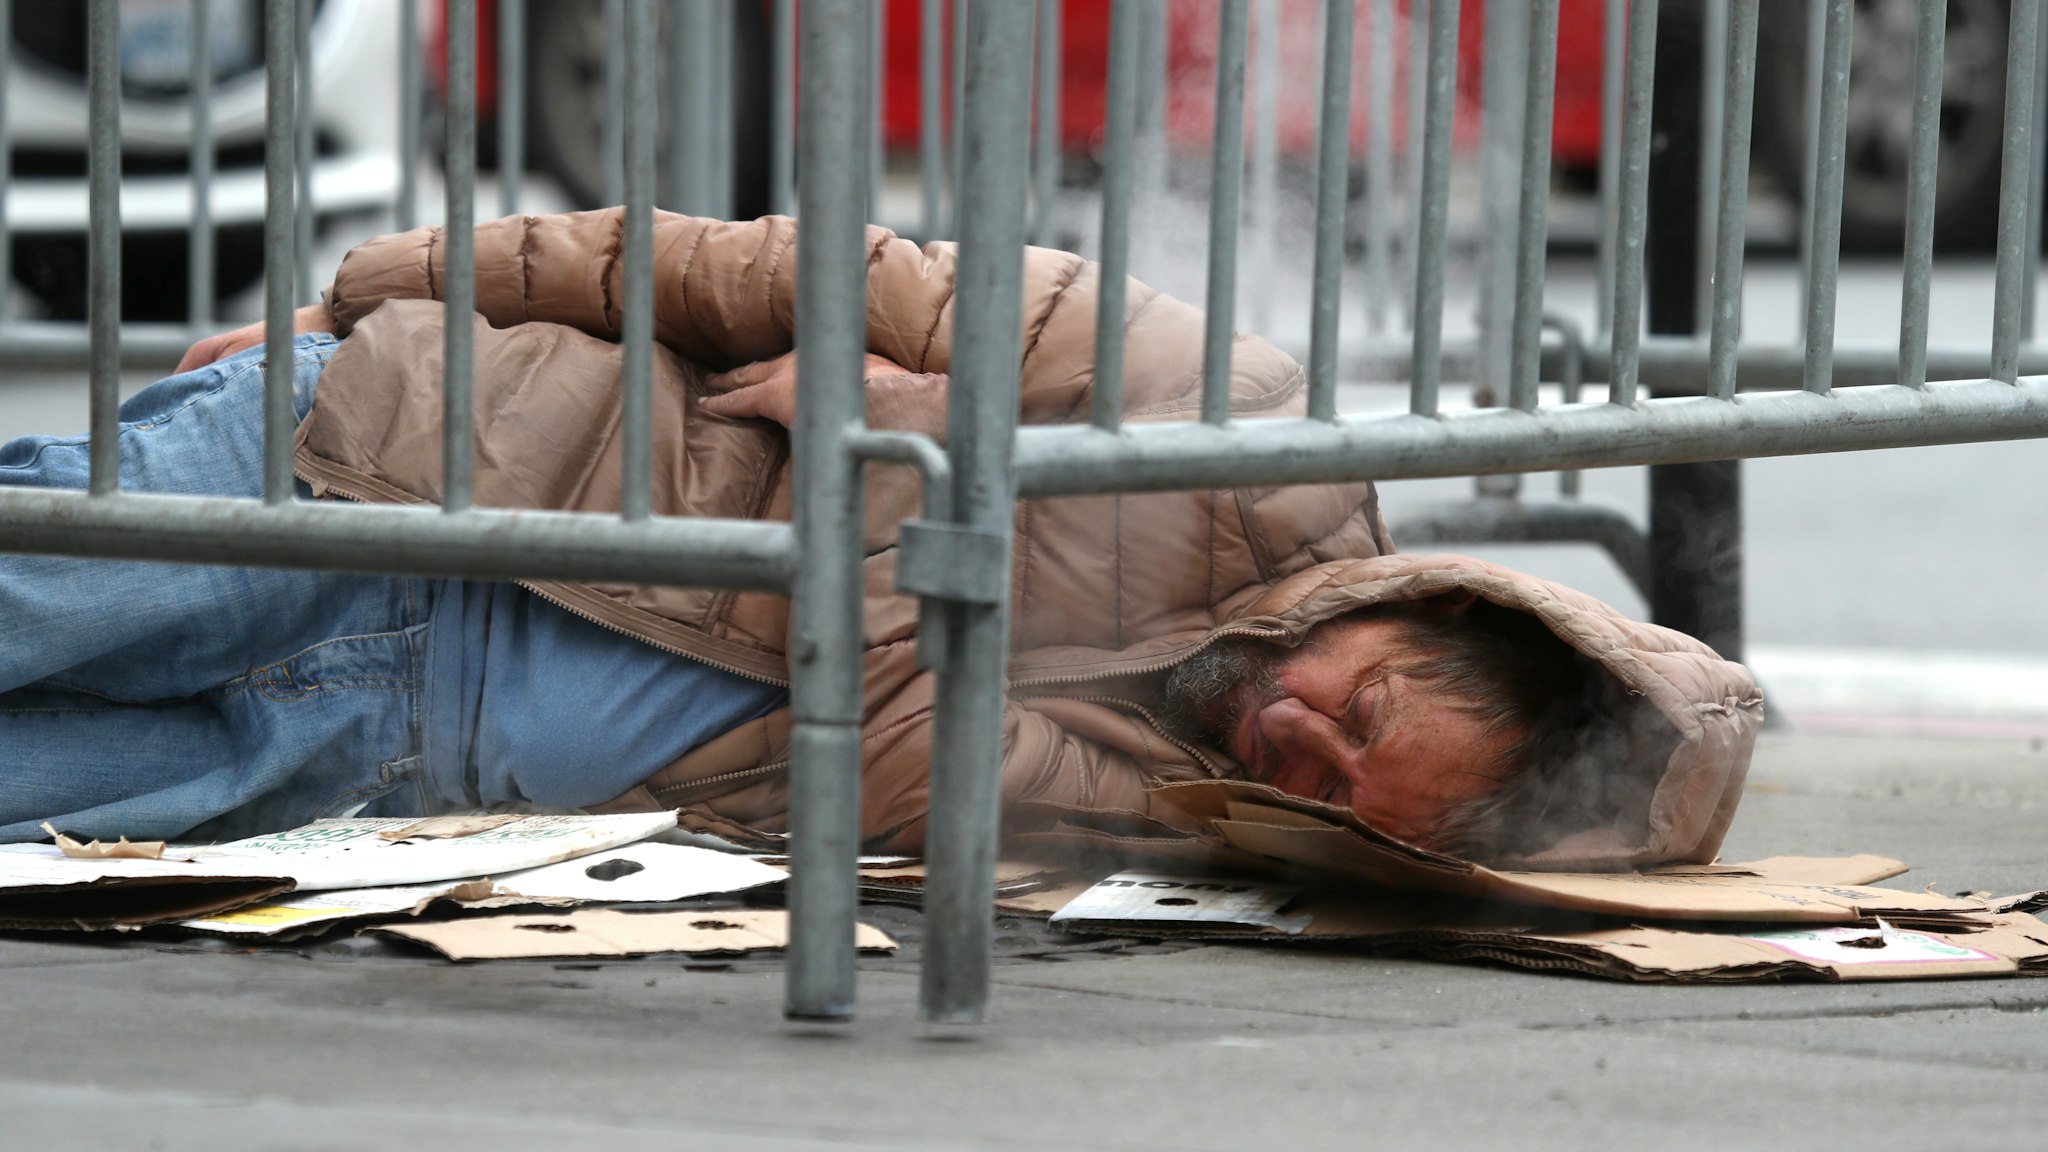 DECEMBER 05: A homeless man sleeps on the sidewalk on December 05, 2019 in San Francisco, California. California Gov. Gavin Newsom announced plans to release $650 million in emergency aid that will allocated to California cities and counties in an effort to combat the state's homelessness crisis.